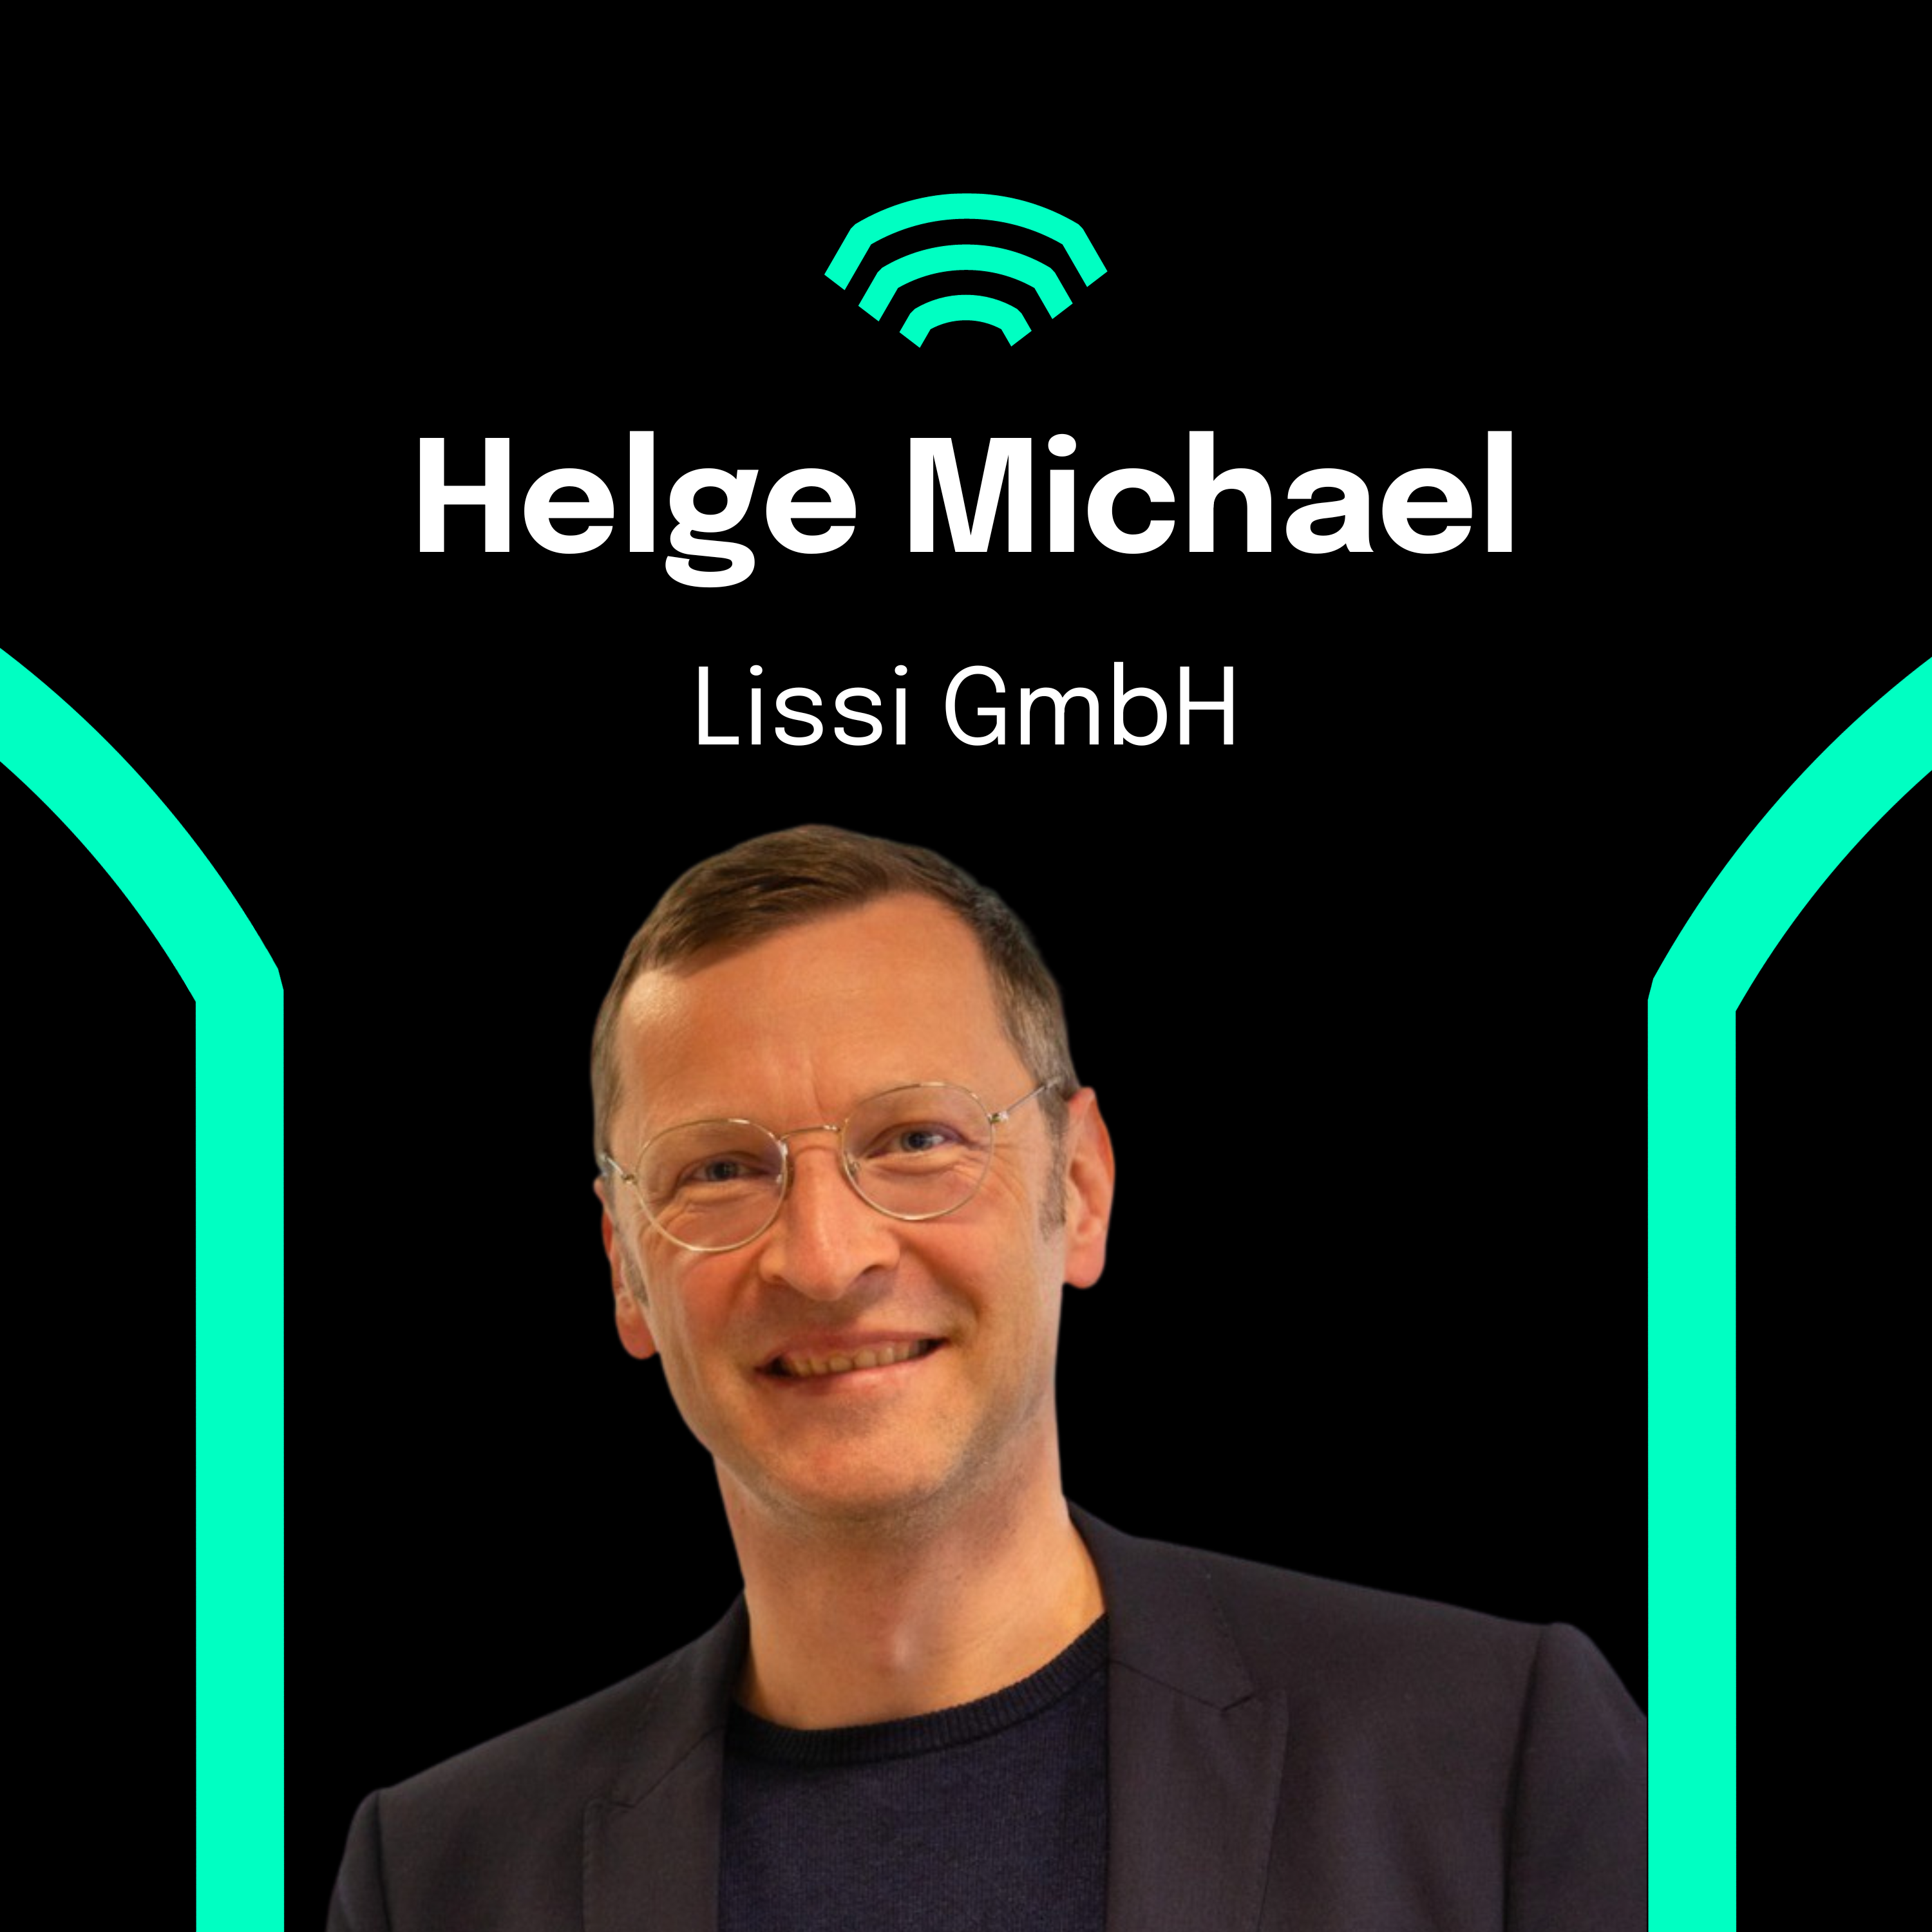 Podcast "Talk Between the Towers" - Lissi GmbH - Helge Michael